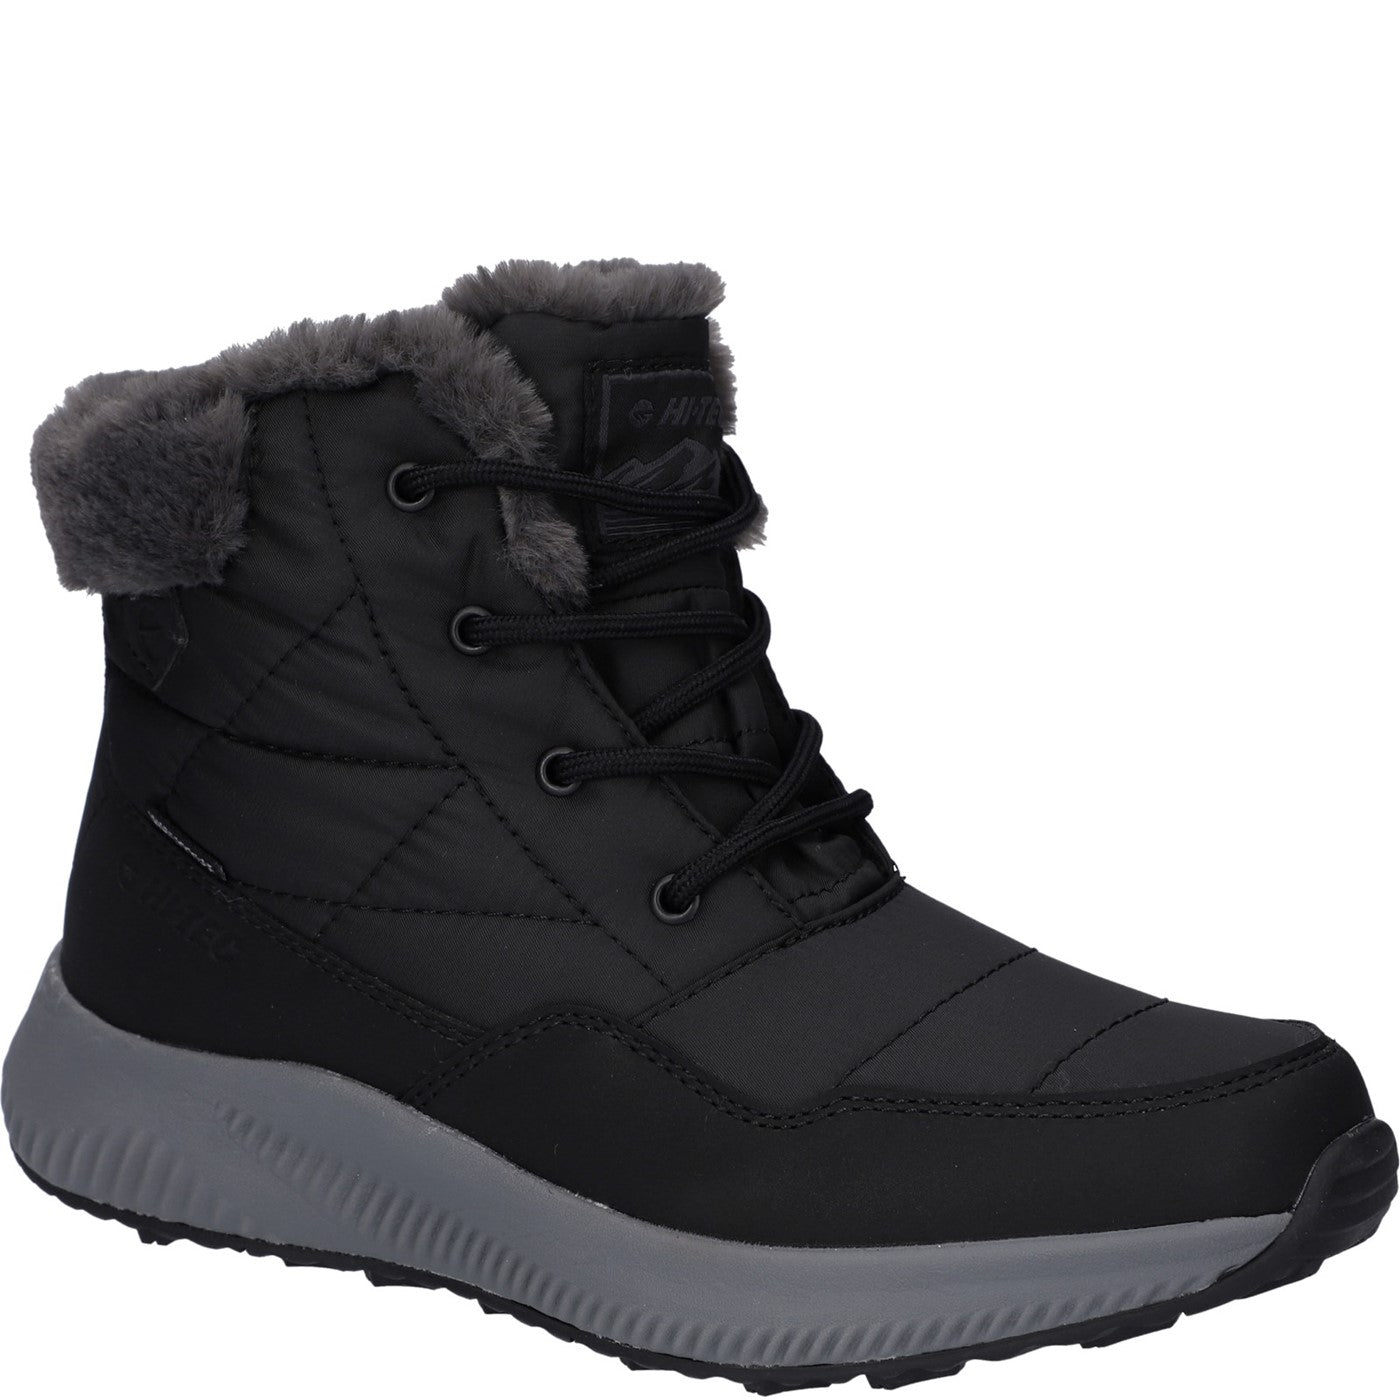 Womens Frosty 200 Boot